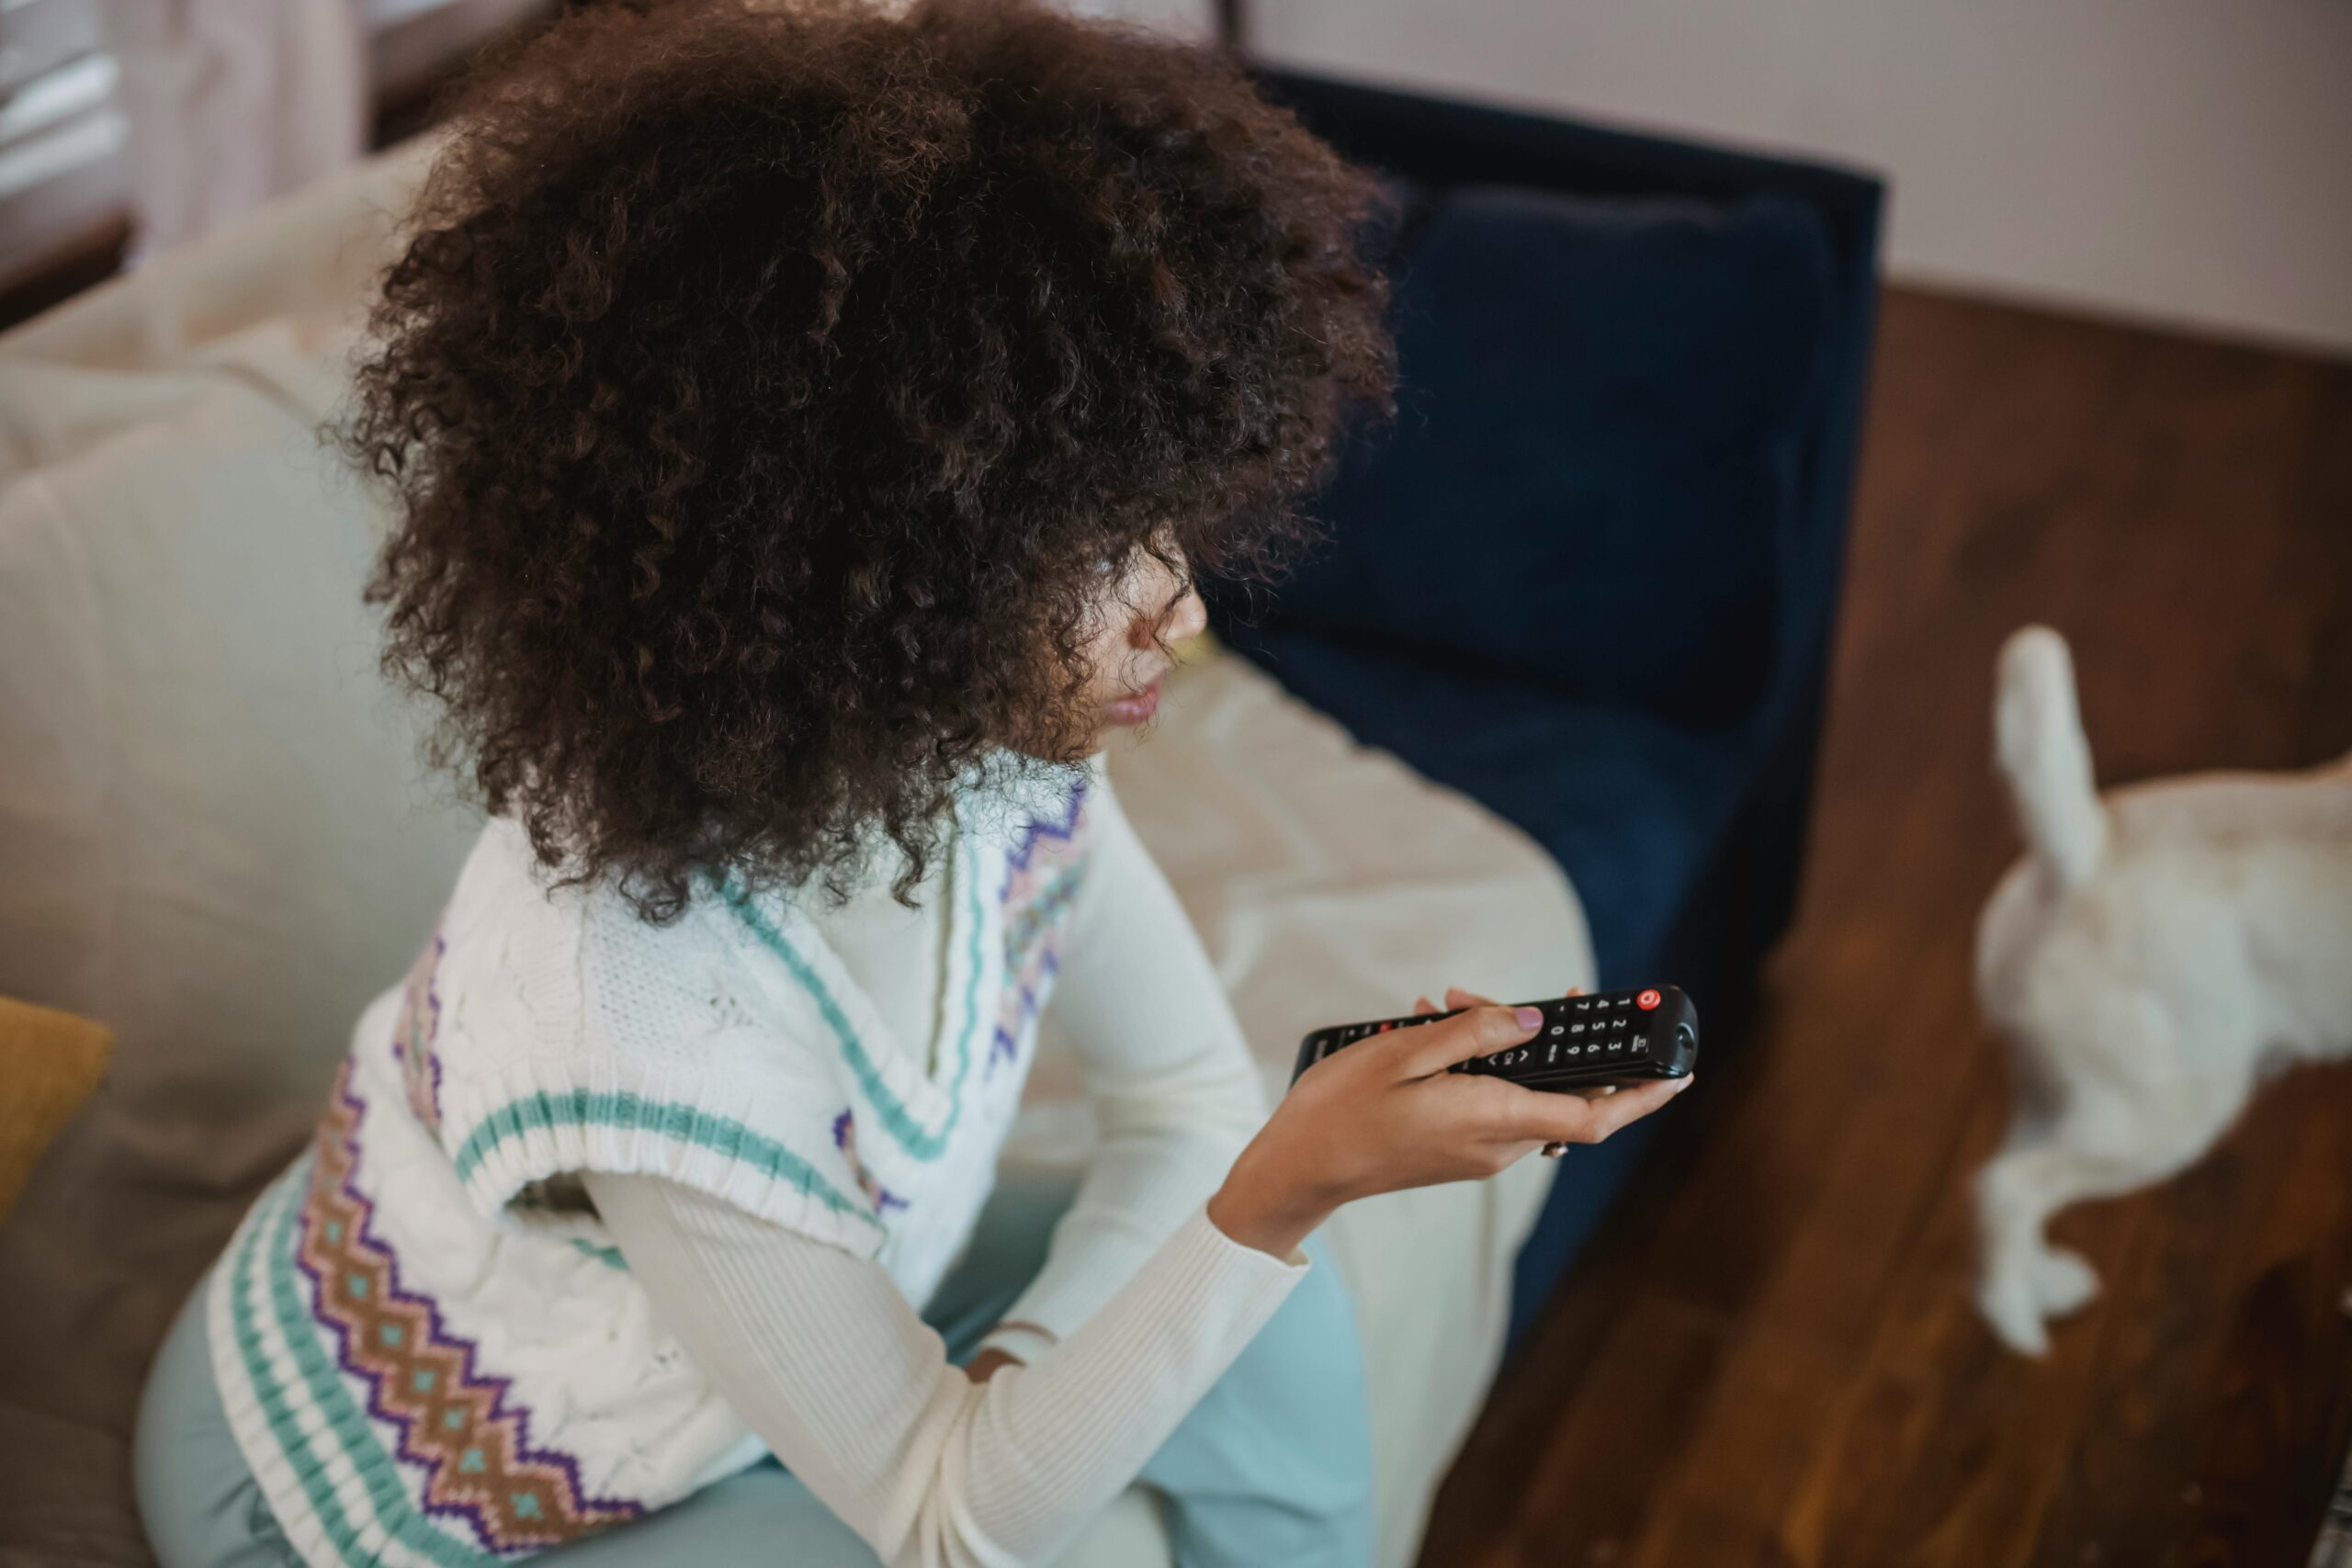 A woman watching tv while holding a remote control